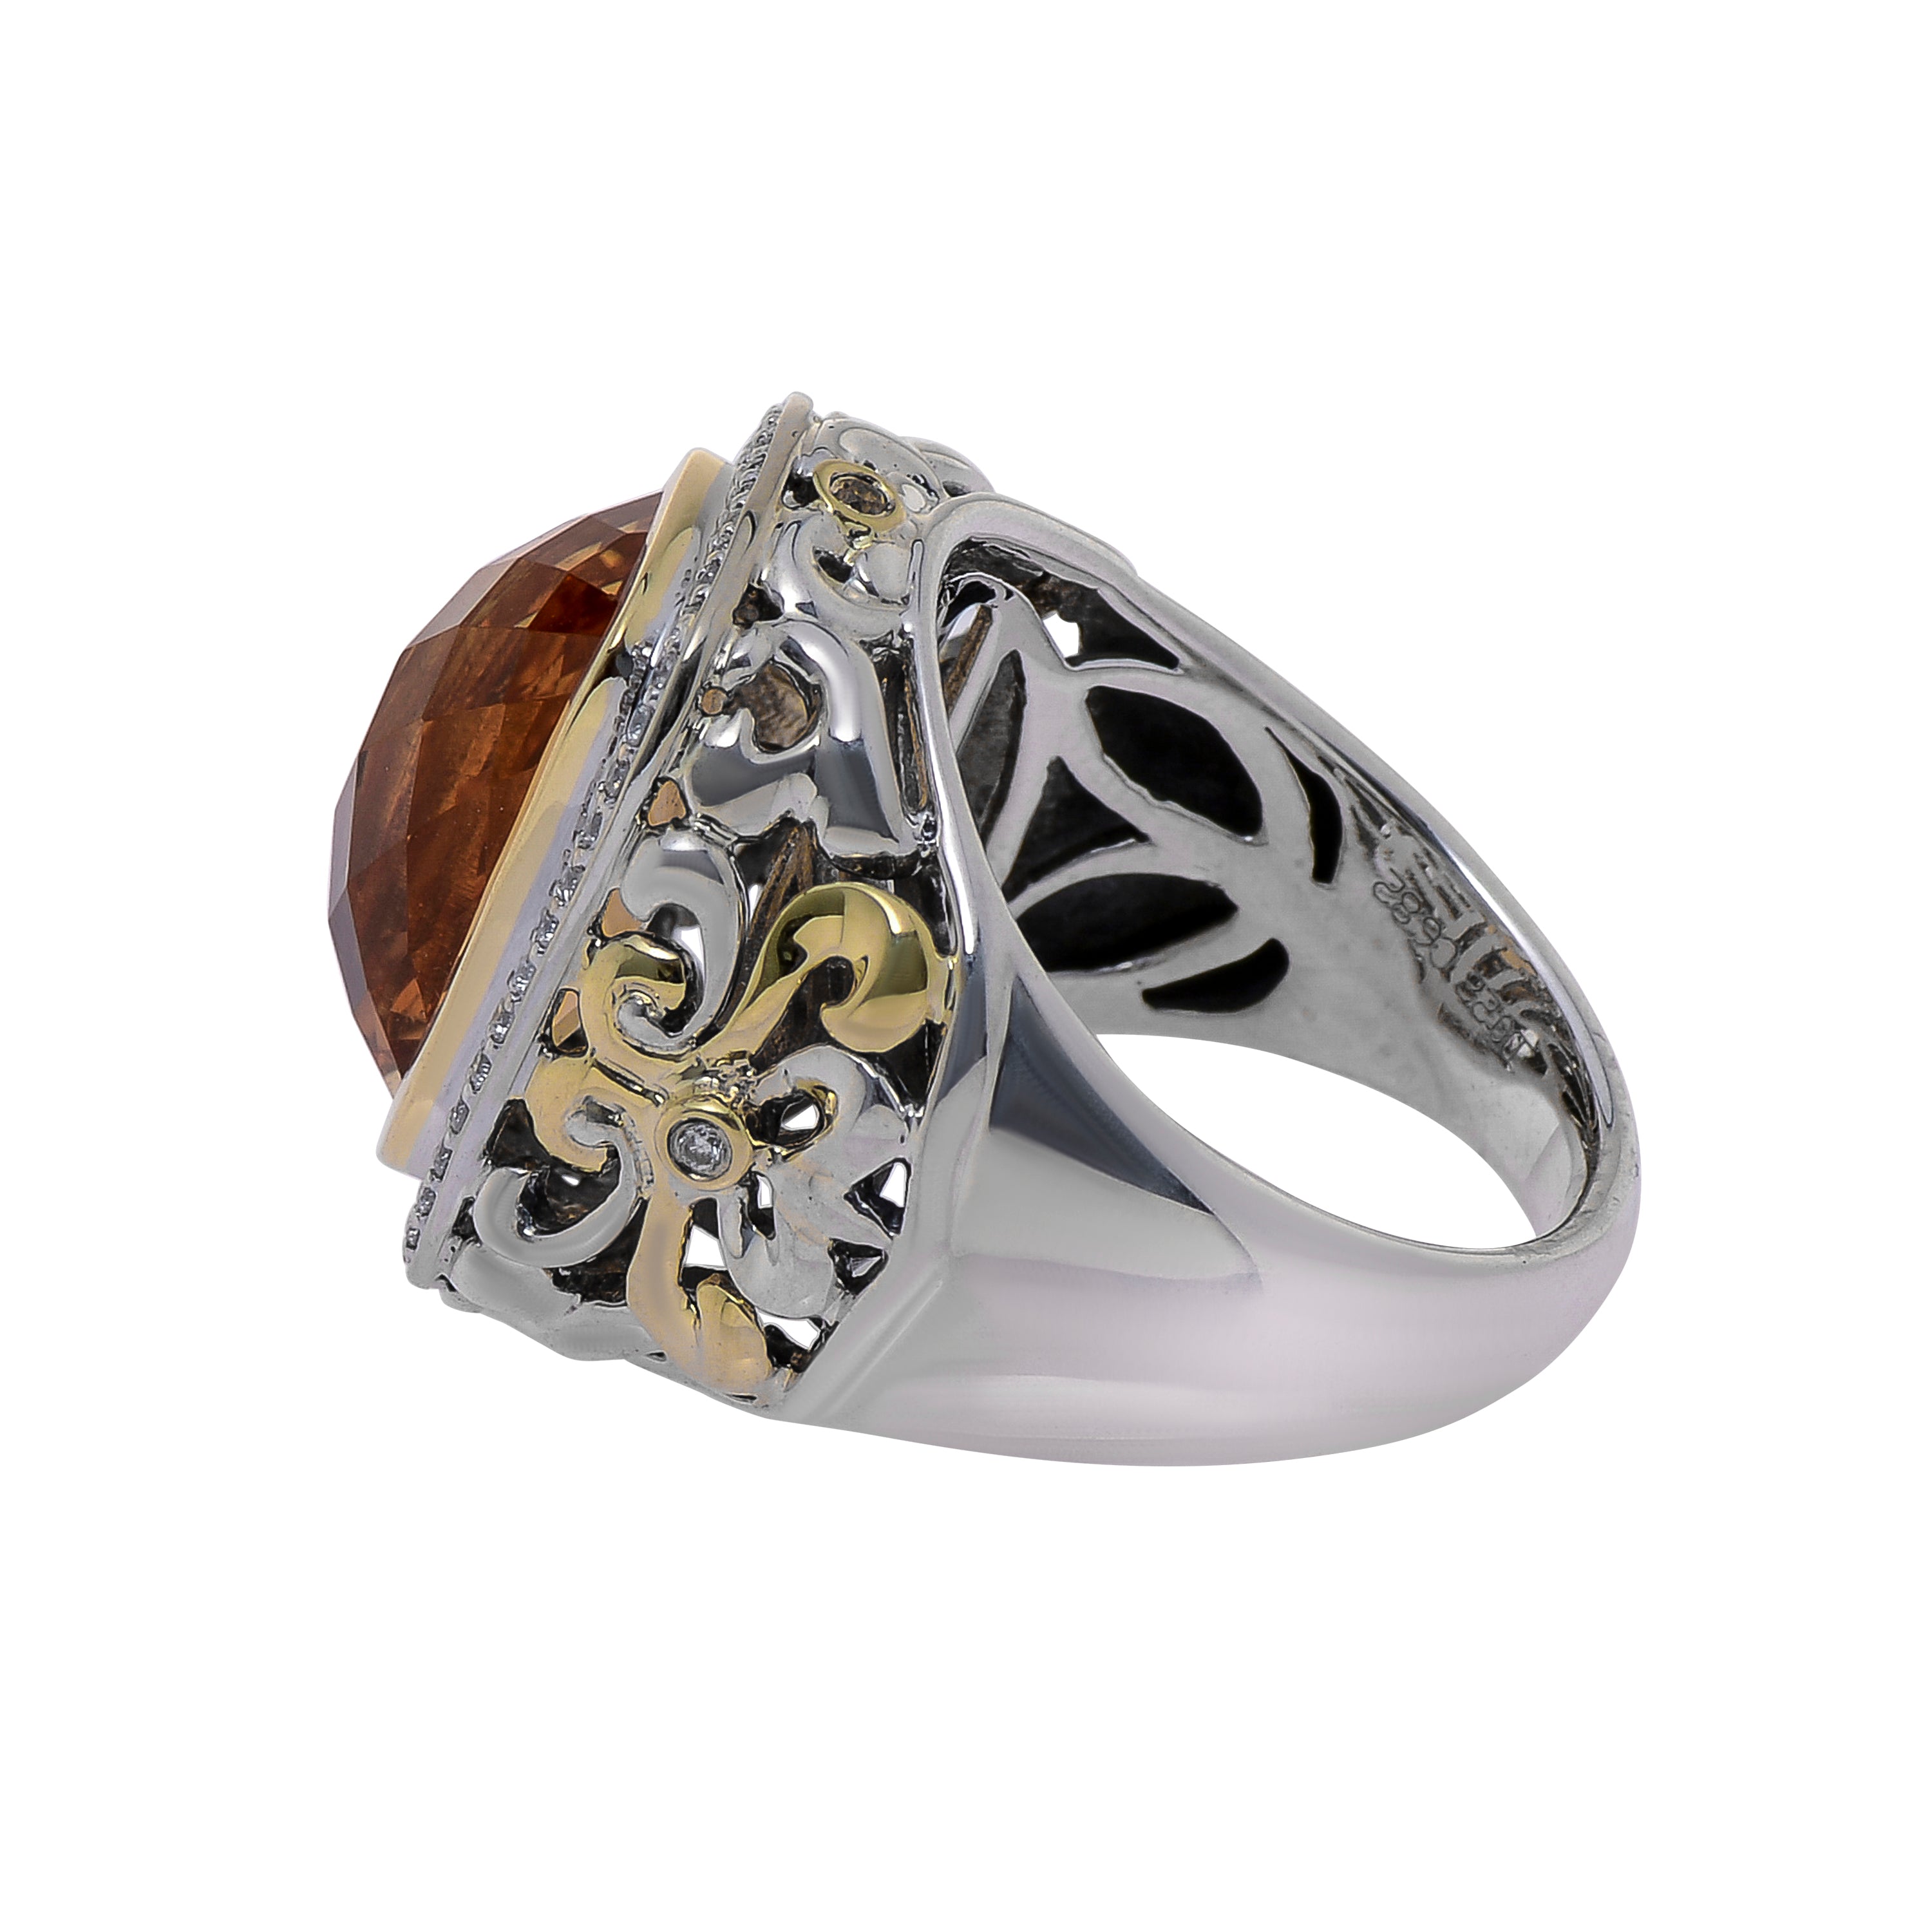 title:Charles Krypell Women's Sterling Silver Citrine Ring 3-6440-SCD;color:not applicable